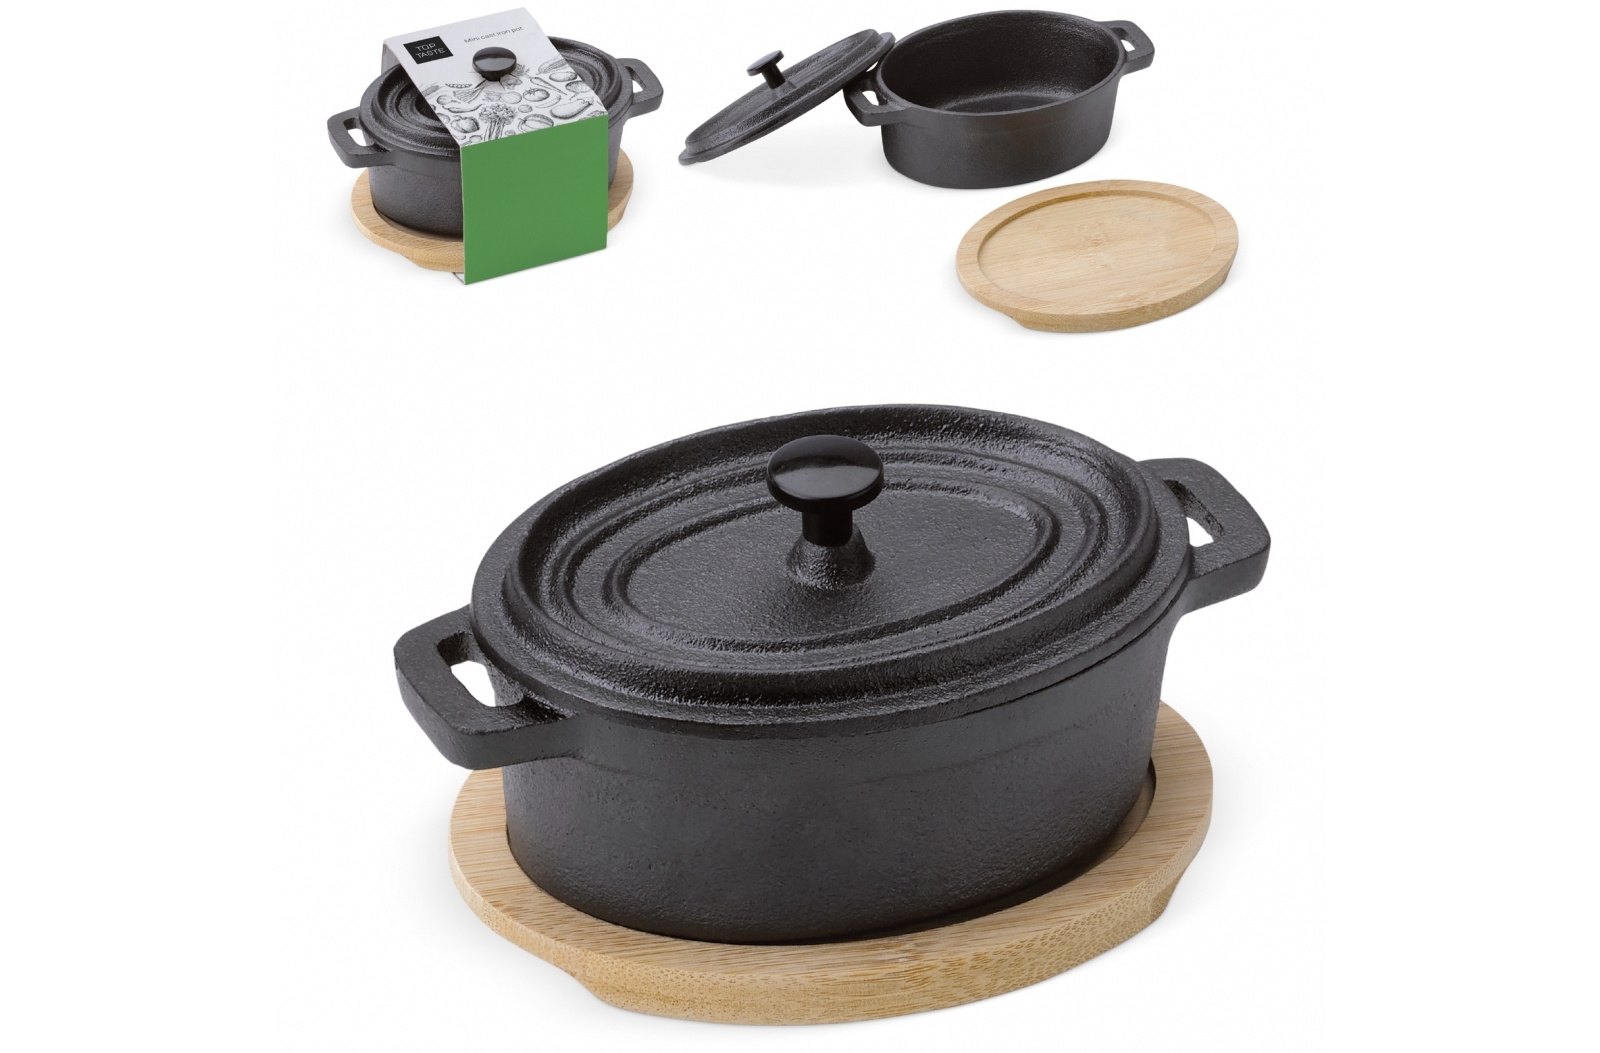 Mini Round Cast Iron Pan on Wooden Serving Tray - Cawdor